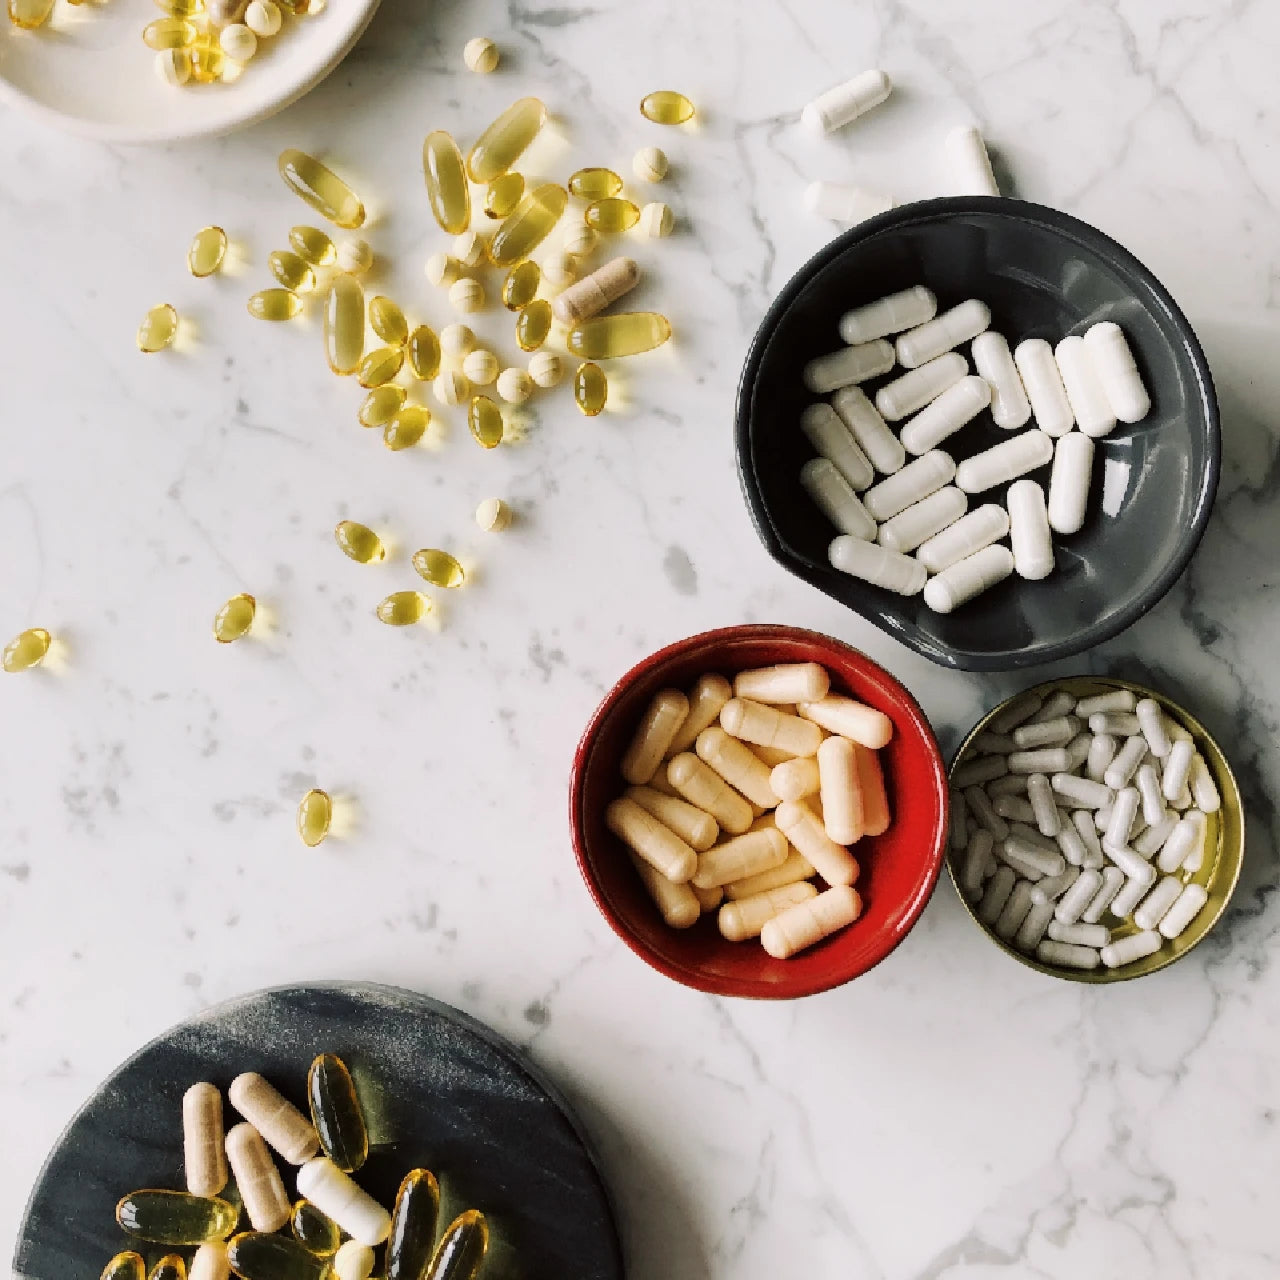 The Best Beauty Supplements For Healthy Skin, Hair, and Nails